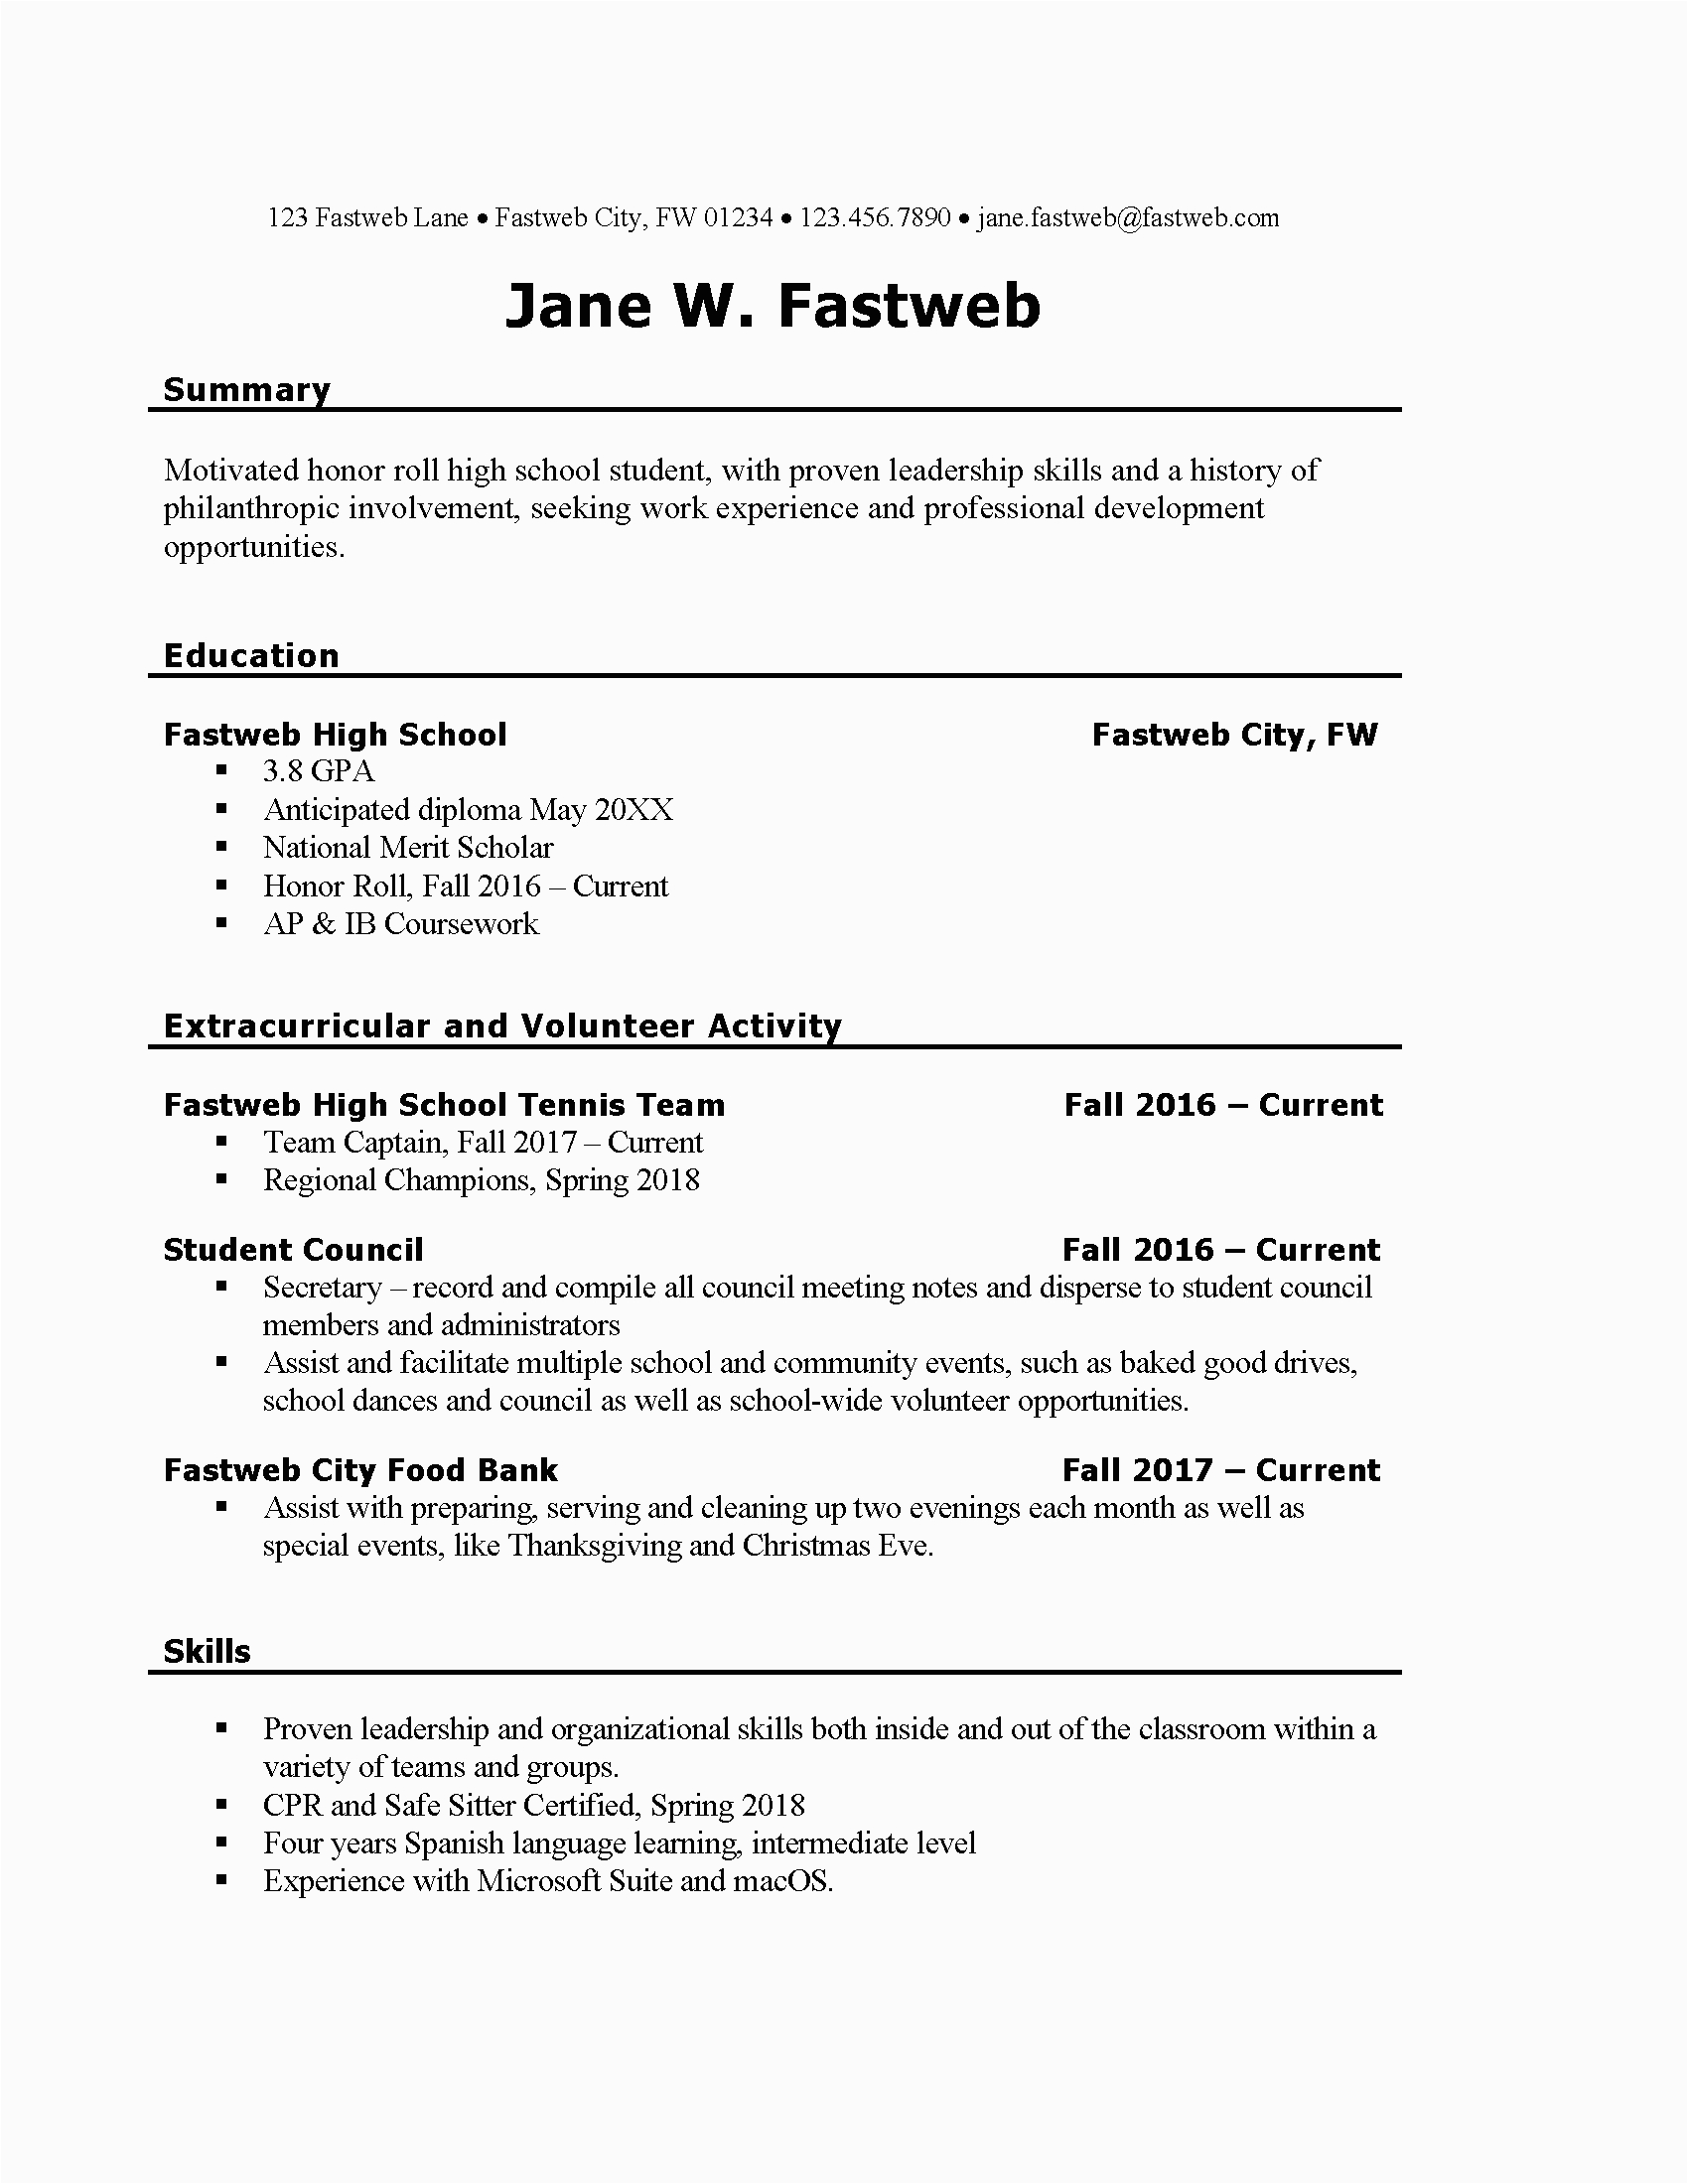 Sample Resume for Part Time Job with No Experience Teenager High School Student Resume with No Work Experience